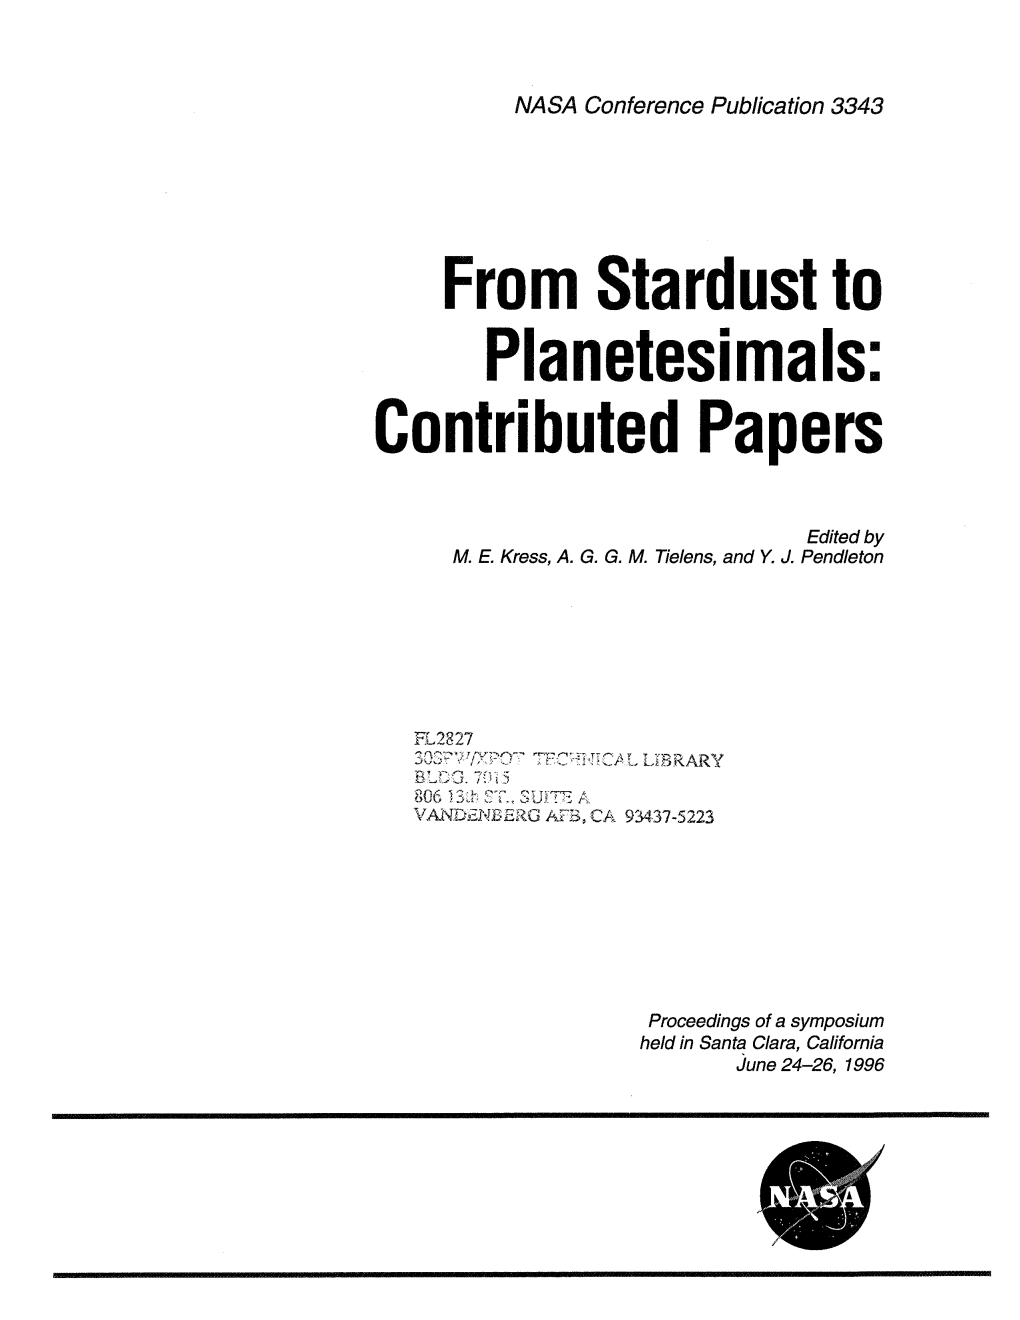 From Stardust to Planetesimals: Contributed Papers